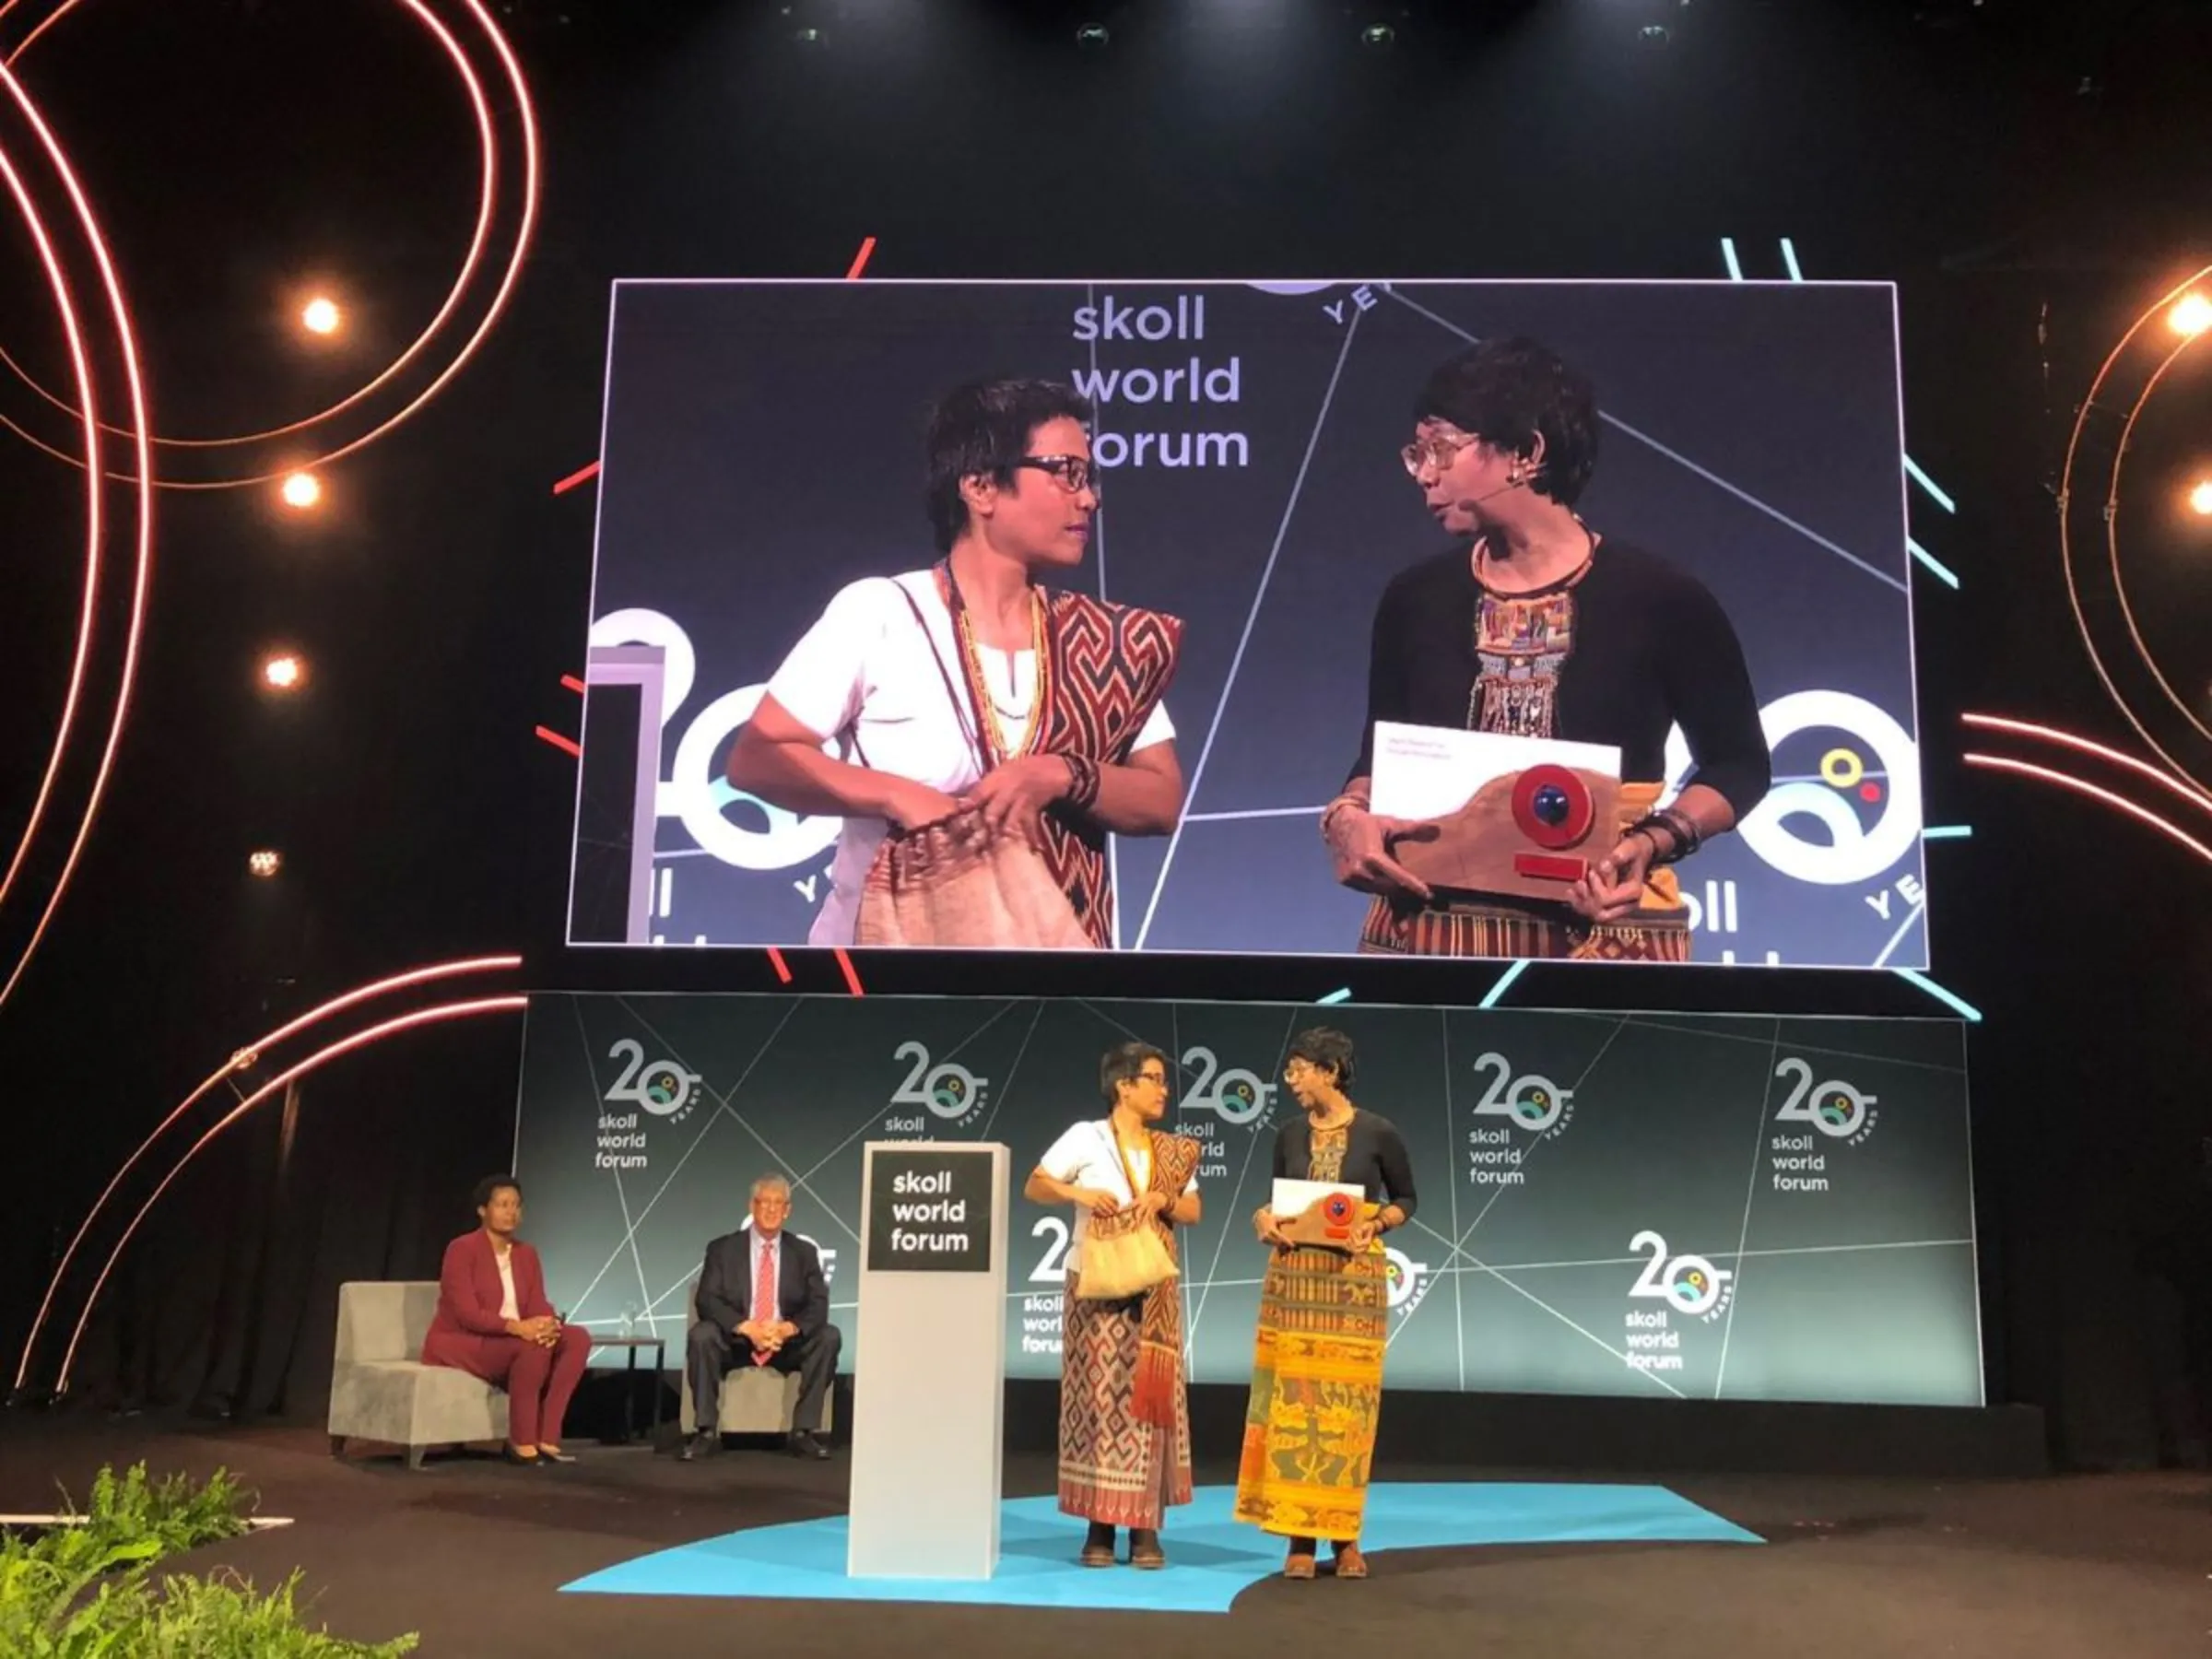 Rukka Sombolinggi and Mina Setra, general secretary and deputy general secretary of AMAN, an alliance that represents 15 million Indigenous people in Indonesia, receive an award for social innovation at the Skoll World Forum in Oxford, England, April 13, 2023